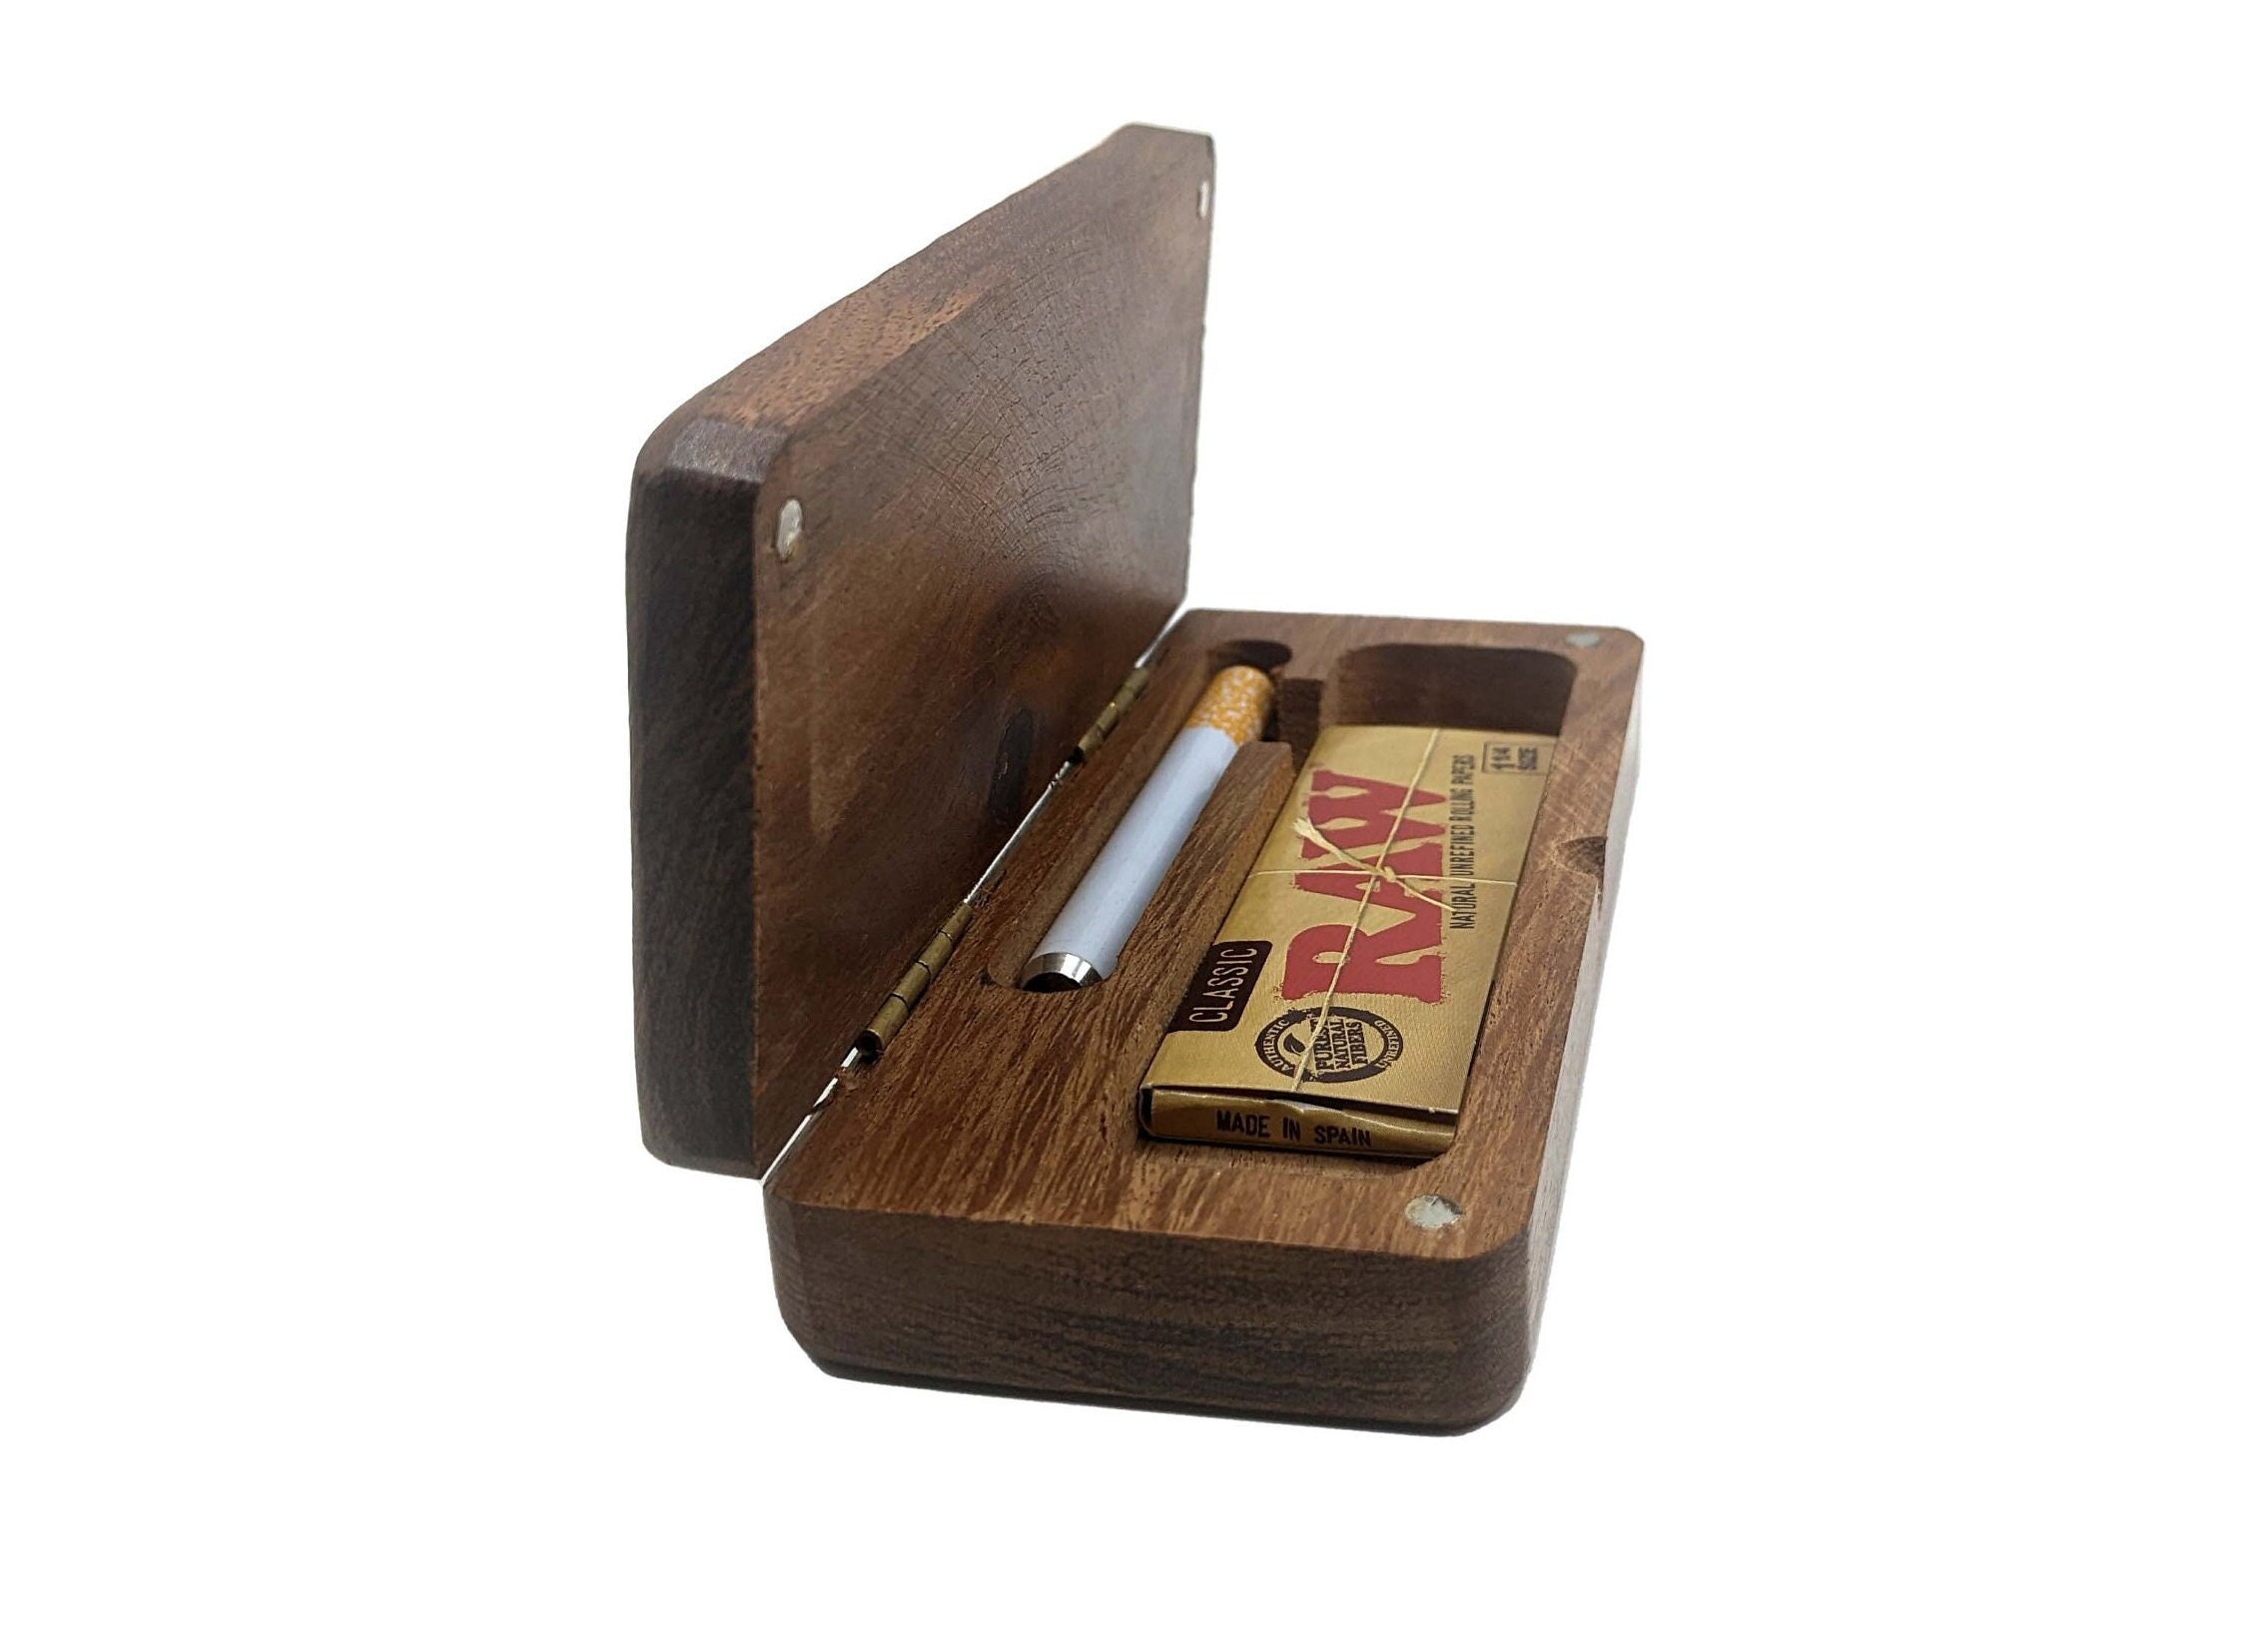 Cigarette & Joint Case. Smell Proof Stash Box, Holds 5 Raw Cones